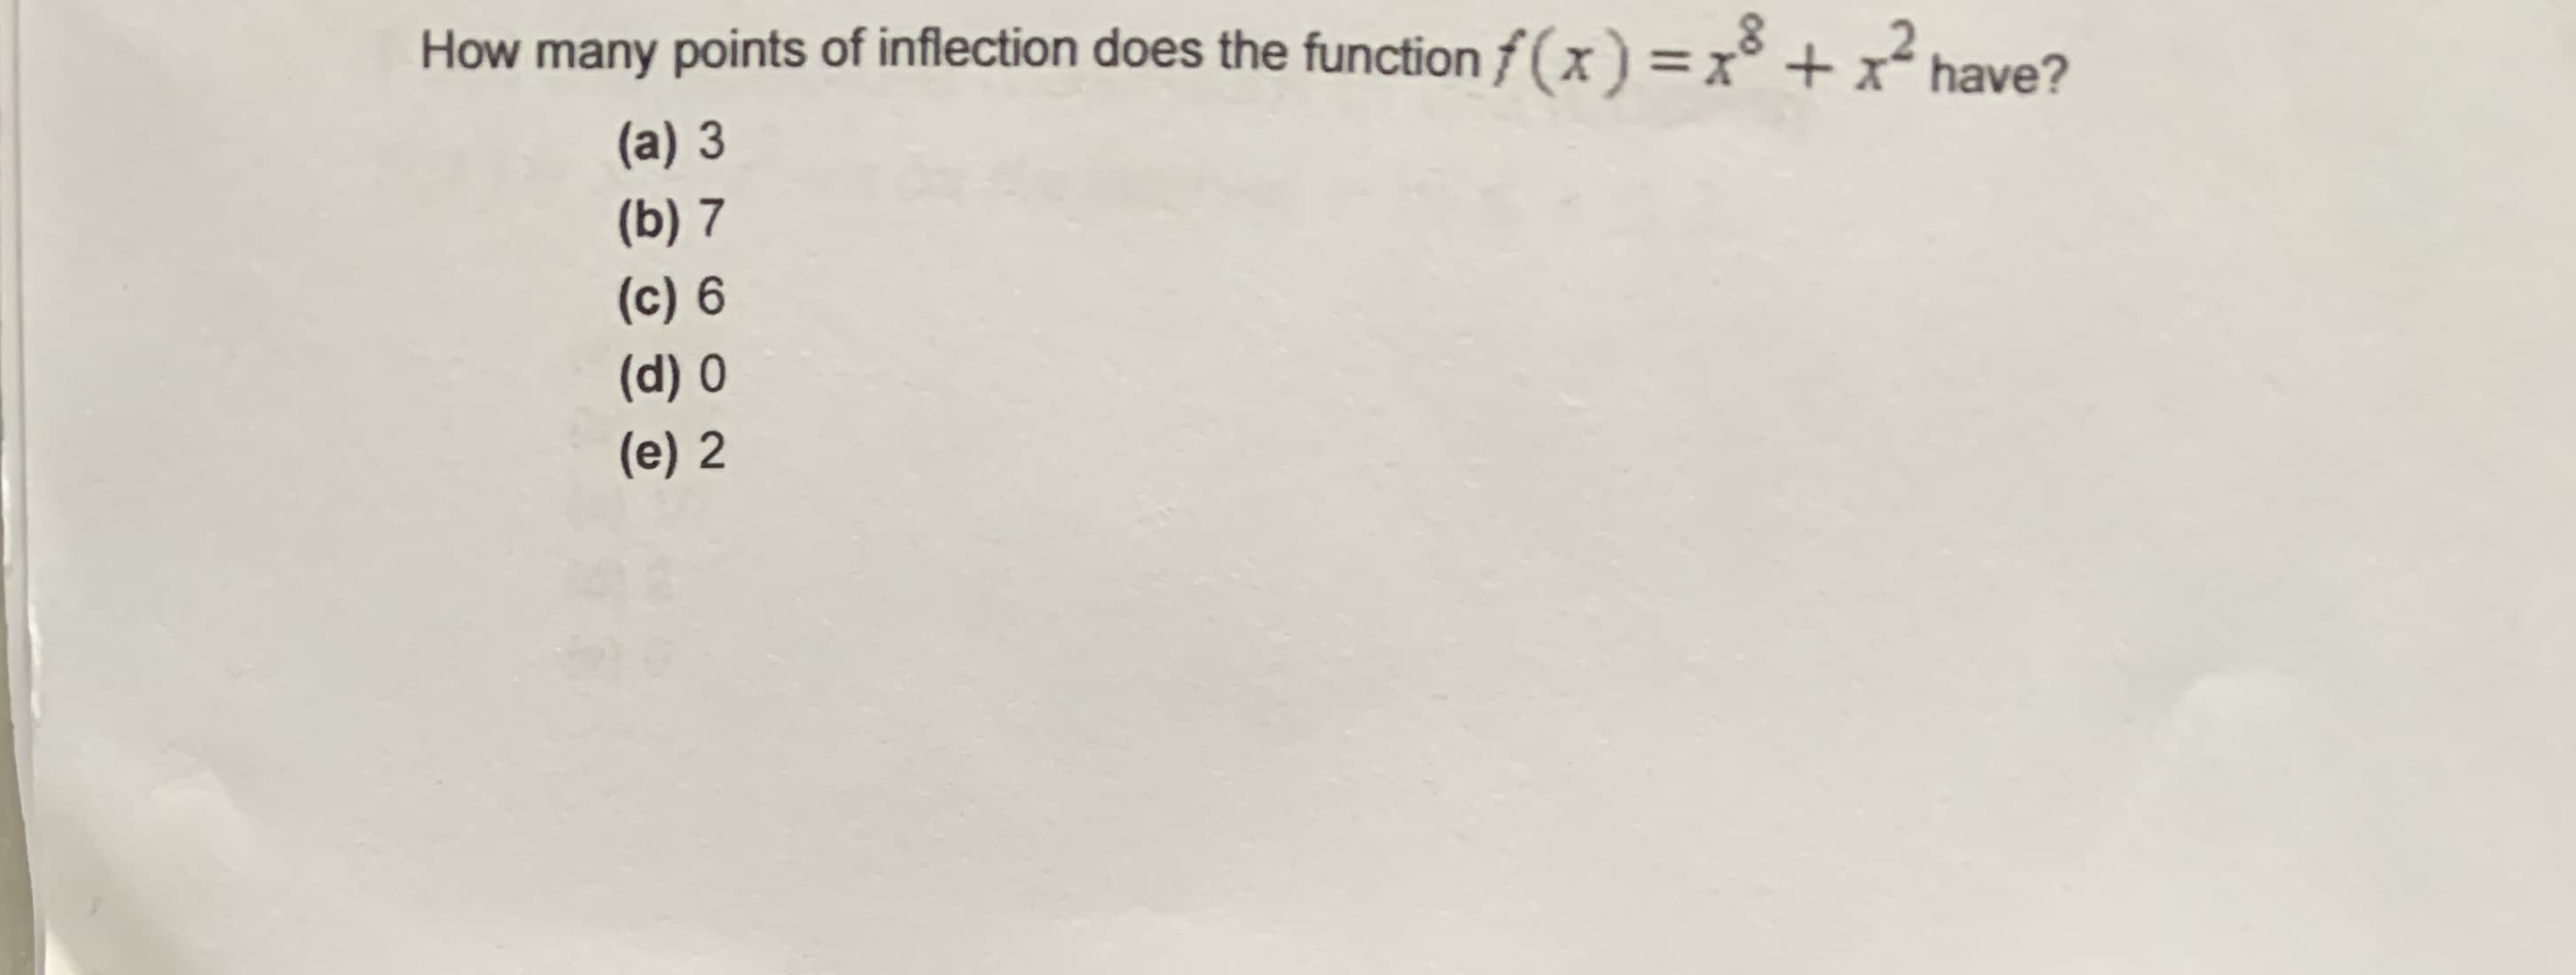 How many points of inflection does the function f(x) =x° + x² have?
(a) 3
(b) 7
(c) 6
(d) 0
(e) 2
